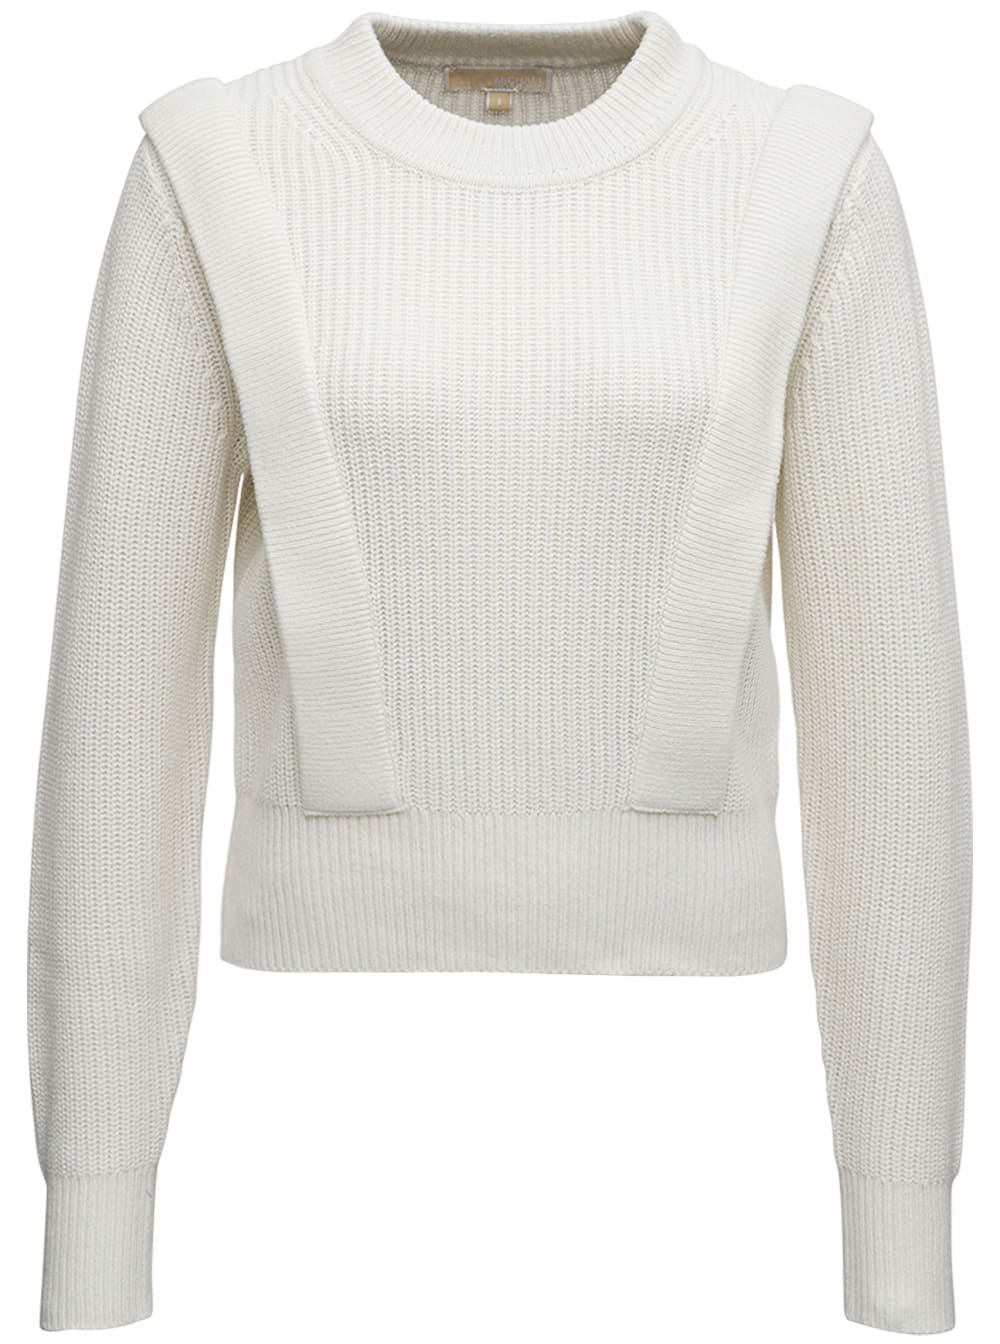 MICHAEL Michael Kors White Recycled Cashmere Sweater